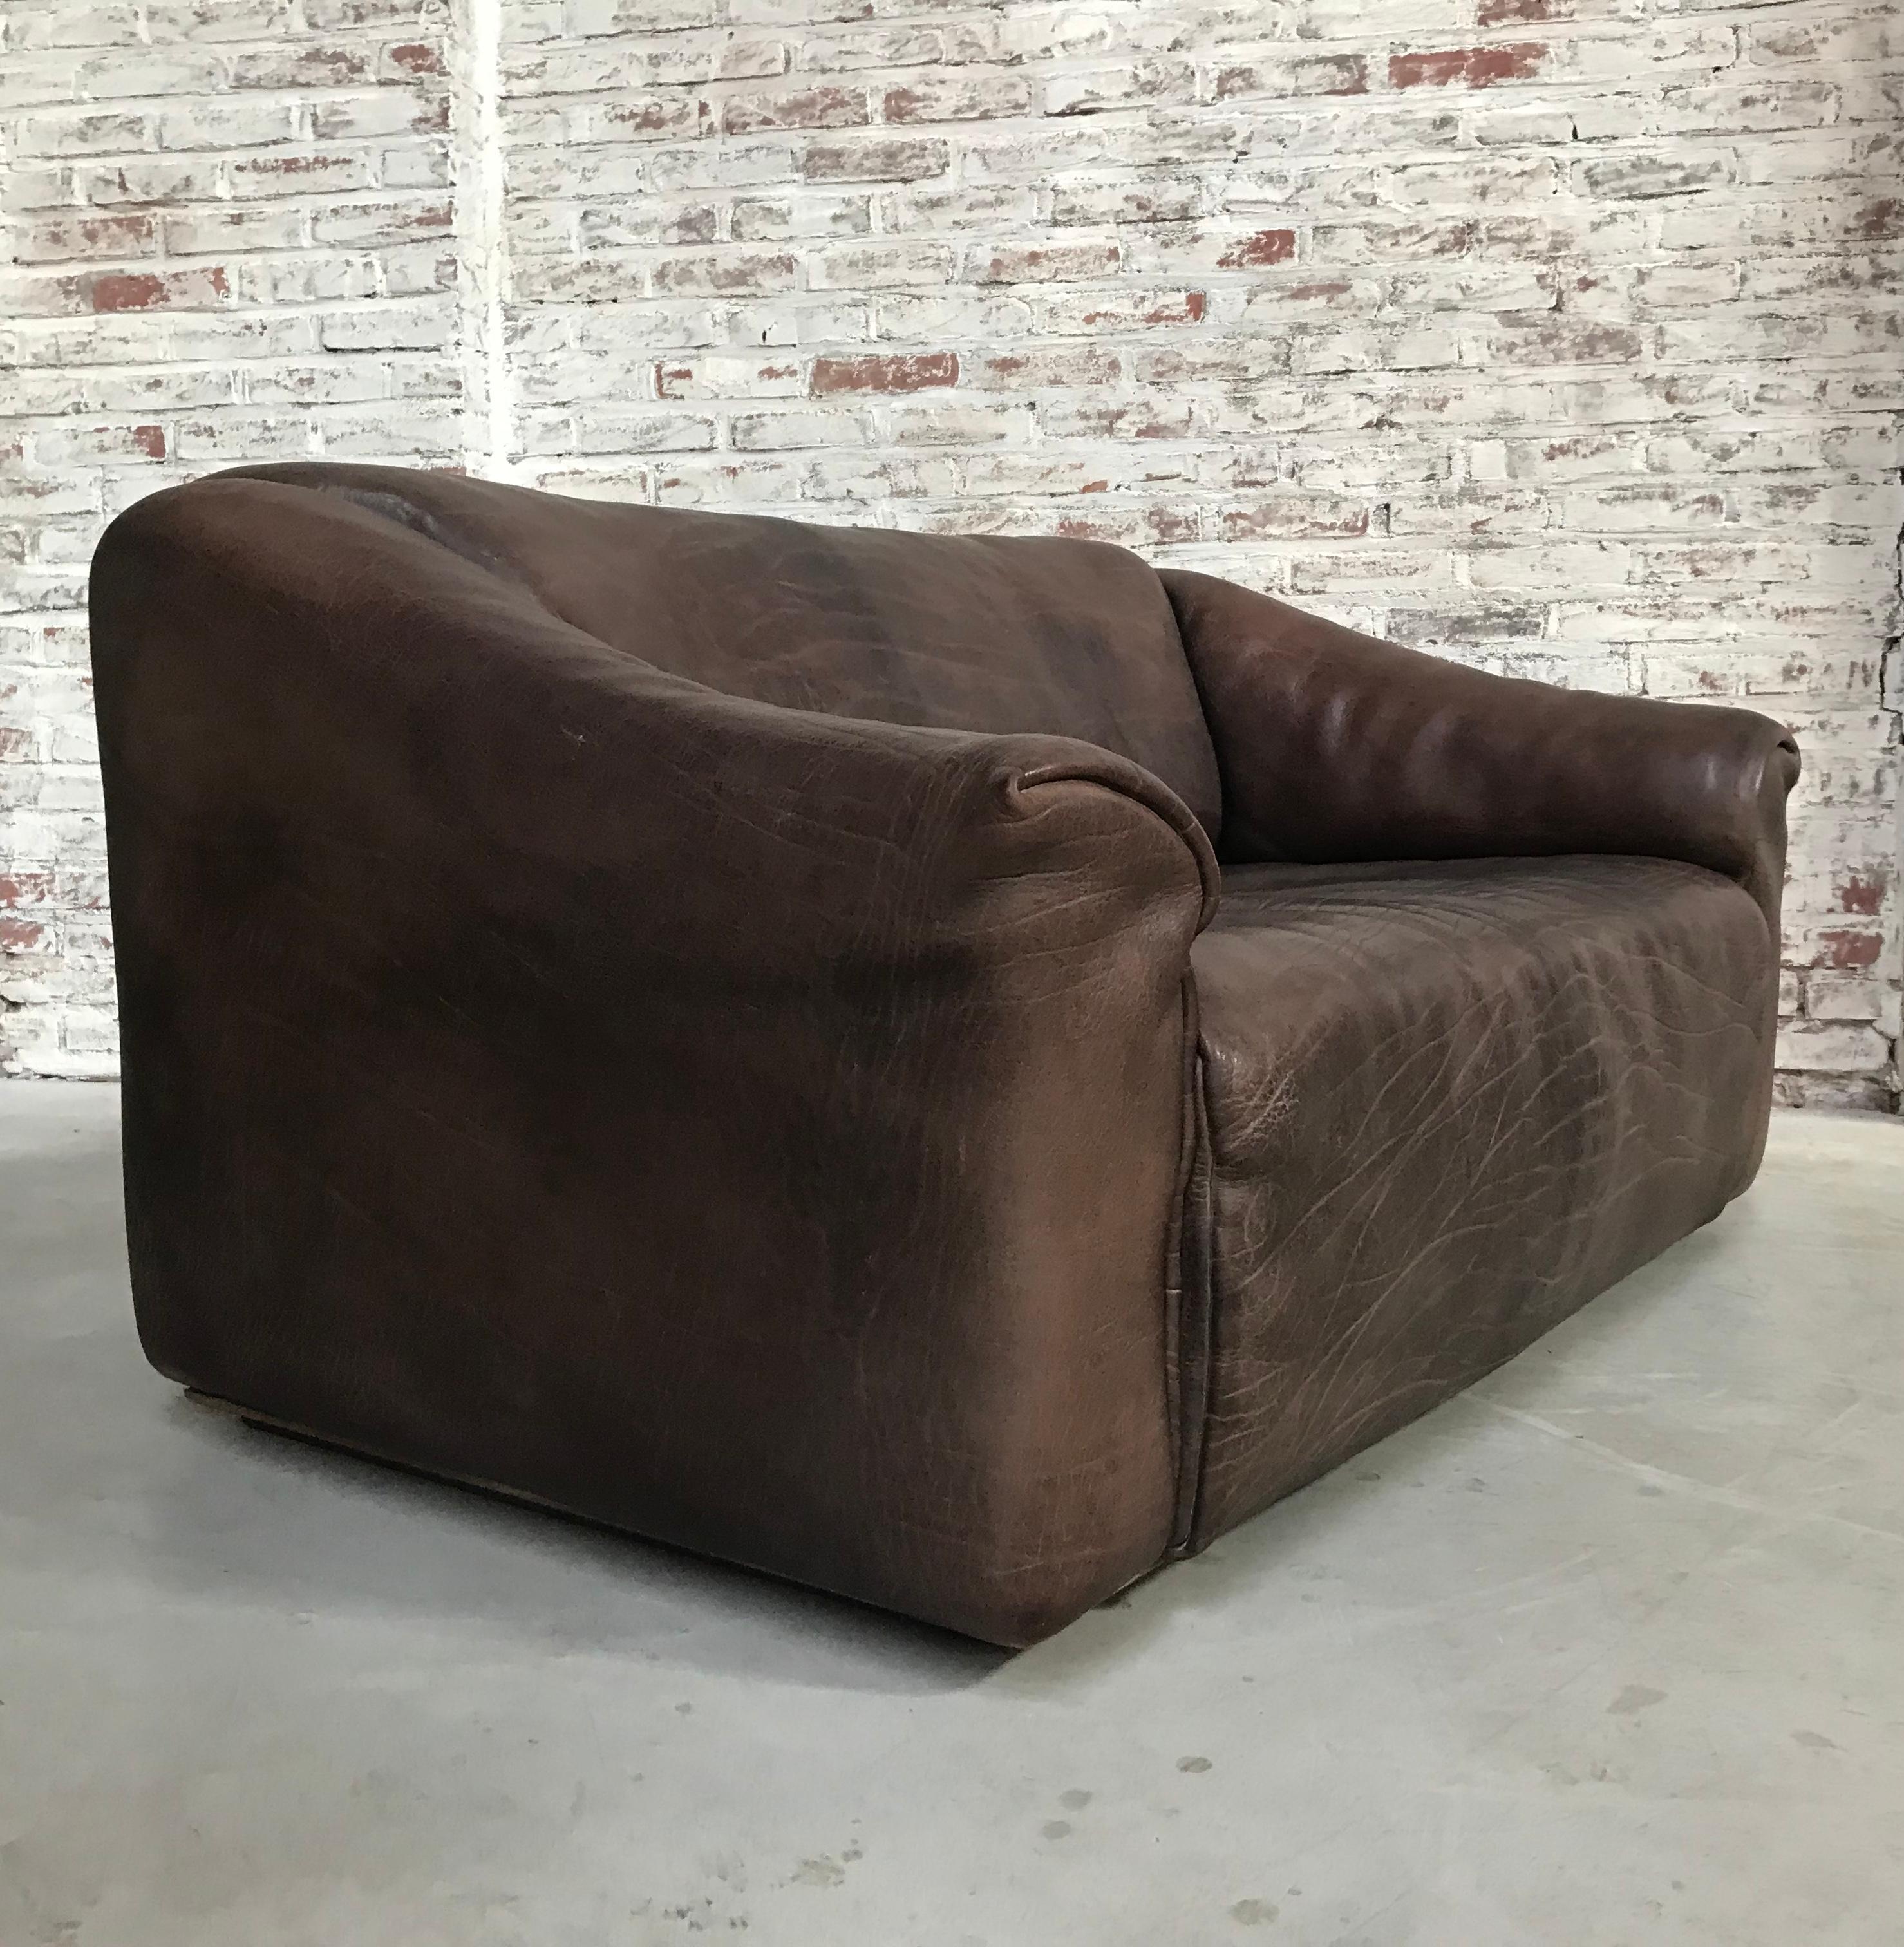 Mid-Century Modern Midcentury Swiss De Sede Ds-47 Two-Seat in Chocolat Neck Leather, 1970s For Sale